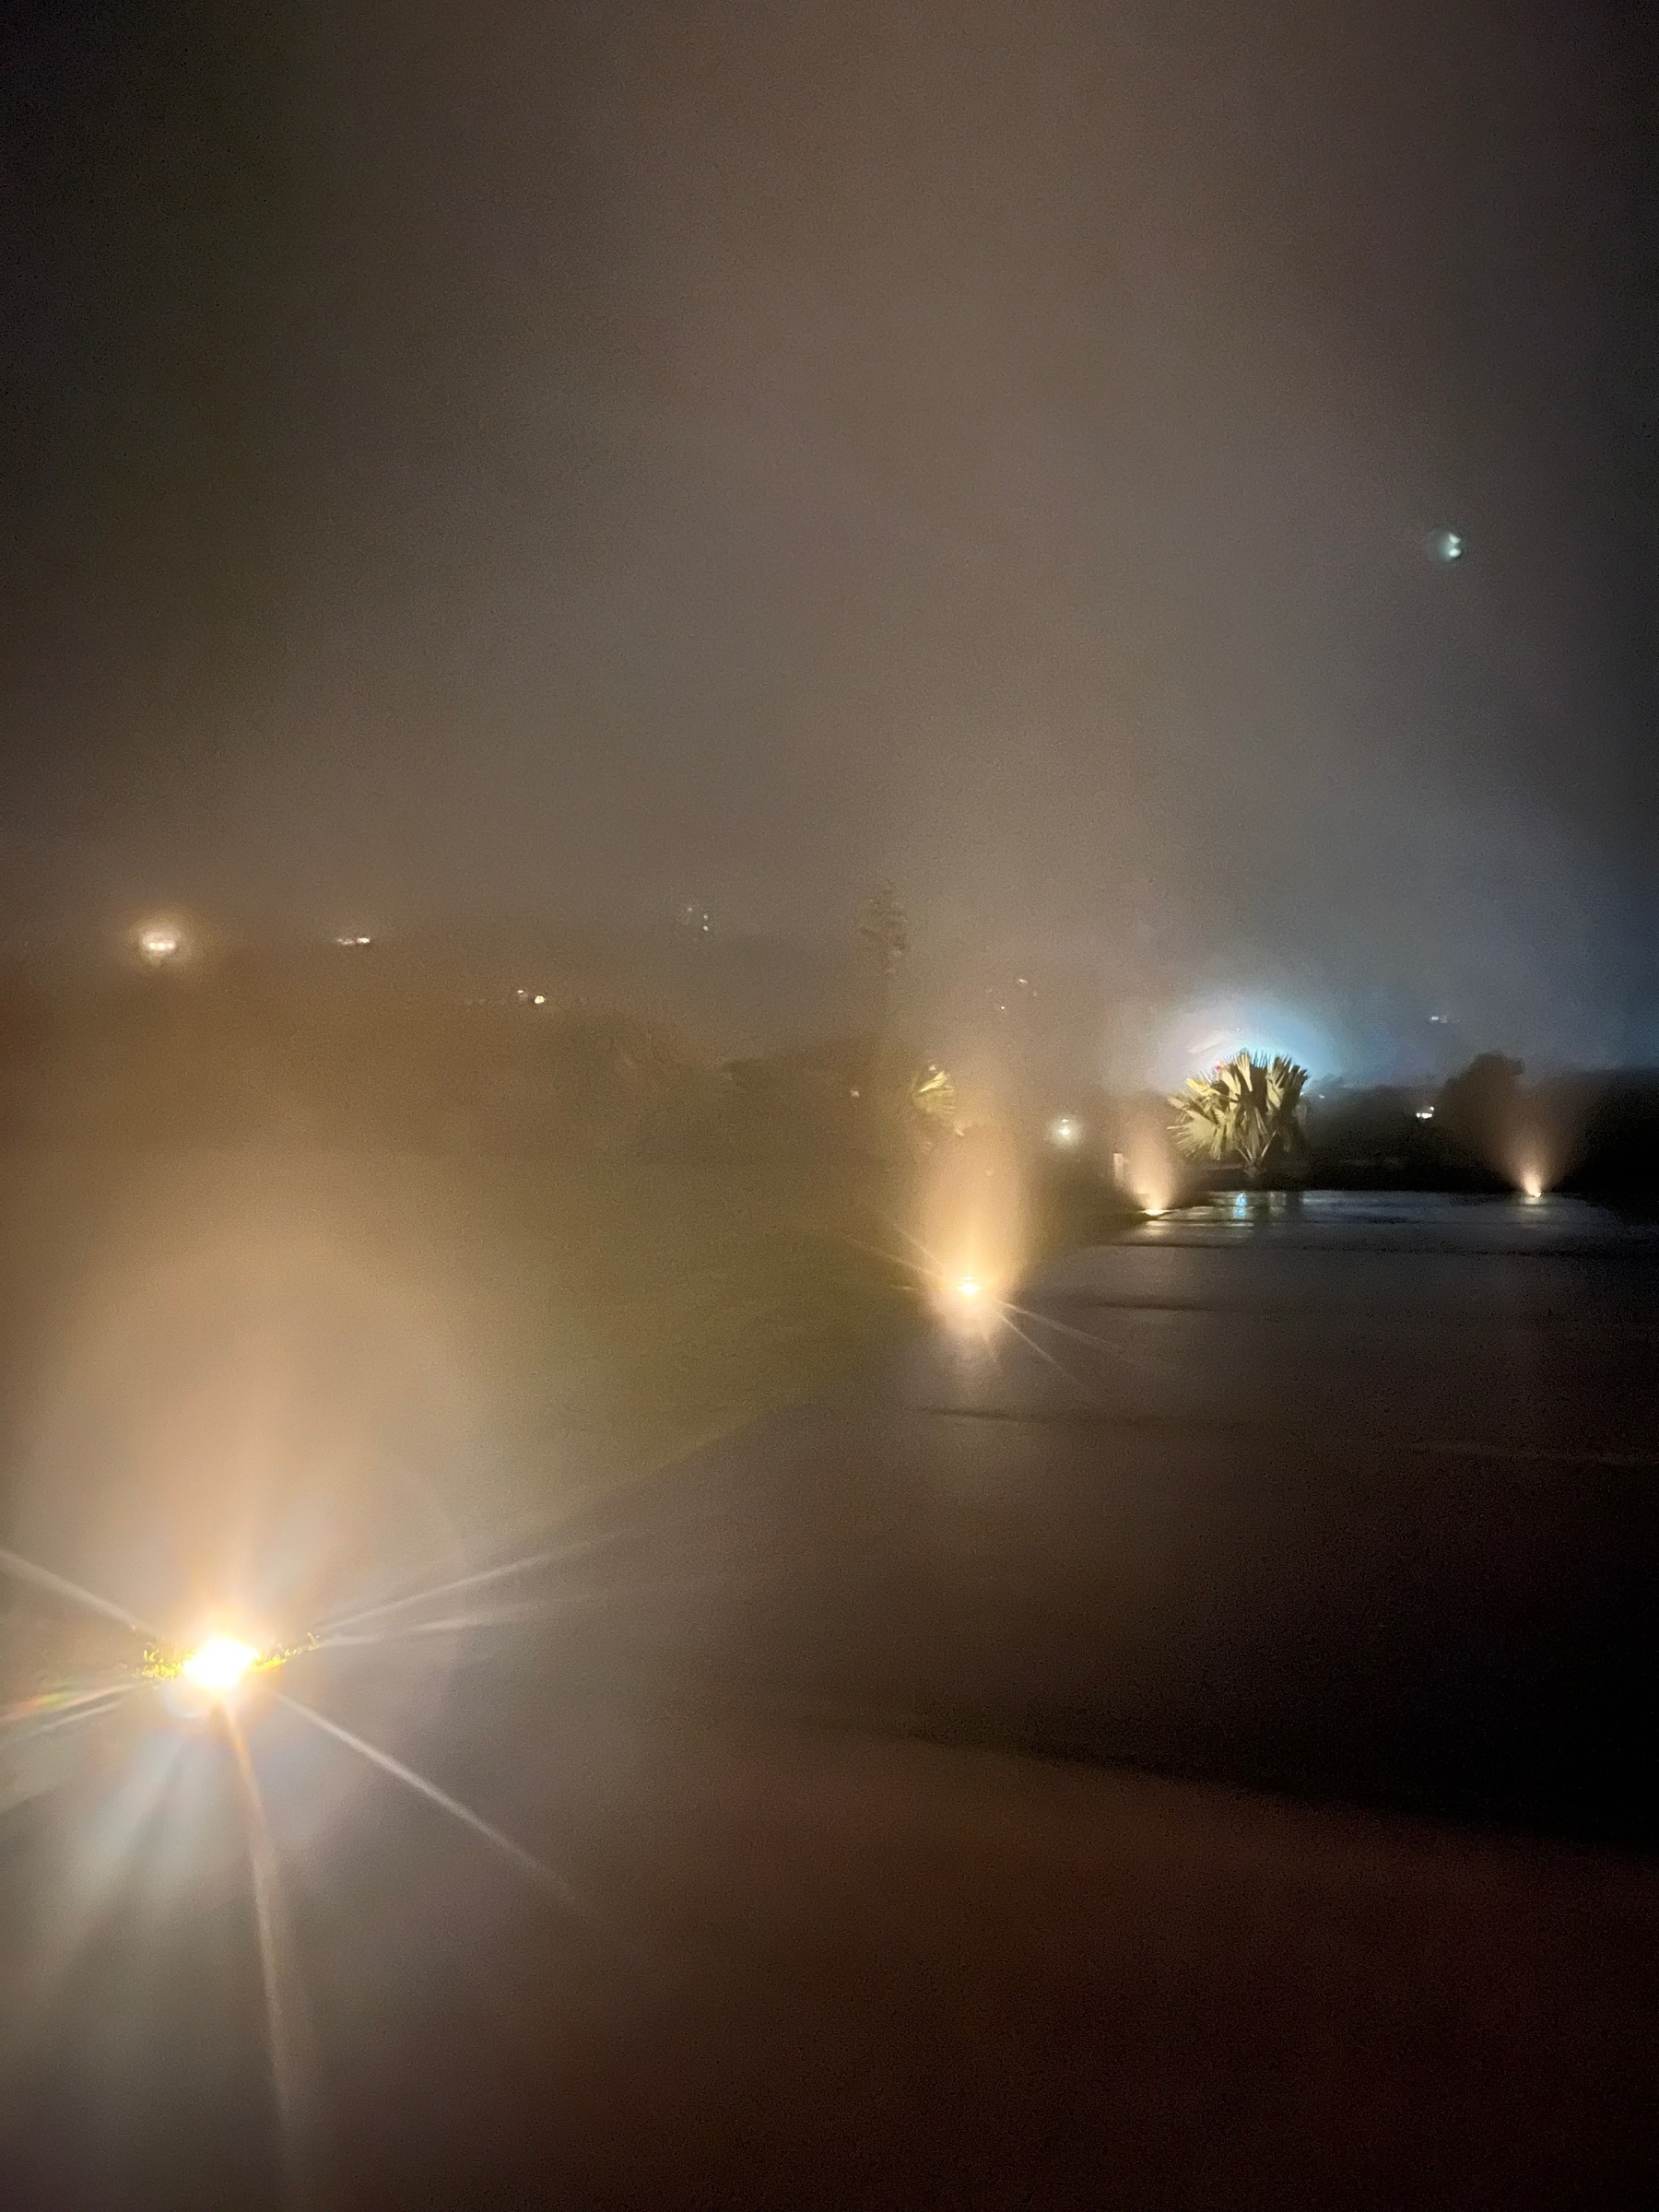 Rain and mist lit up by driveway car and house lights